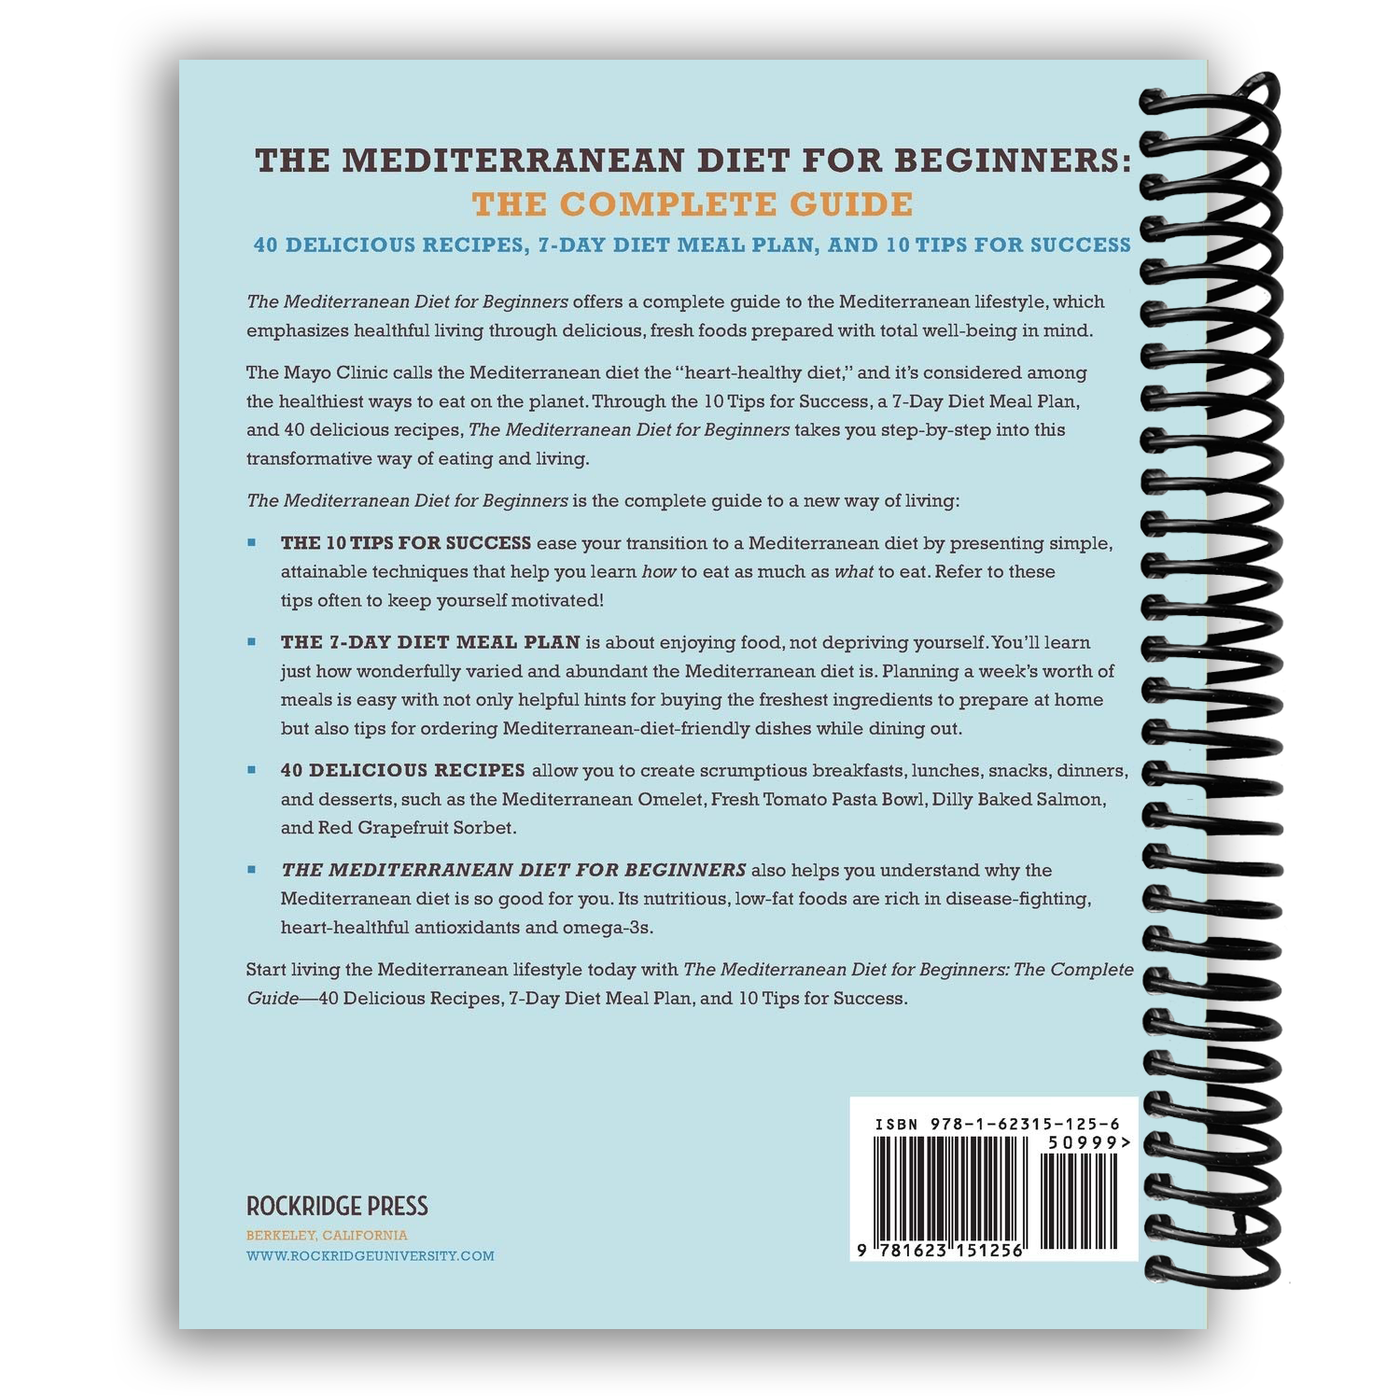 The Mediterranean Diet for Beginners: The Complete Guide - 40 Delicious Recipes, 7-Day Diet Meal Plan, and 10 Tips for Success (Spiral Bound)